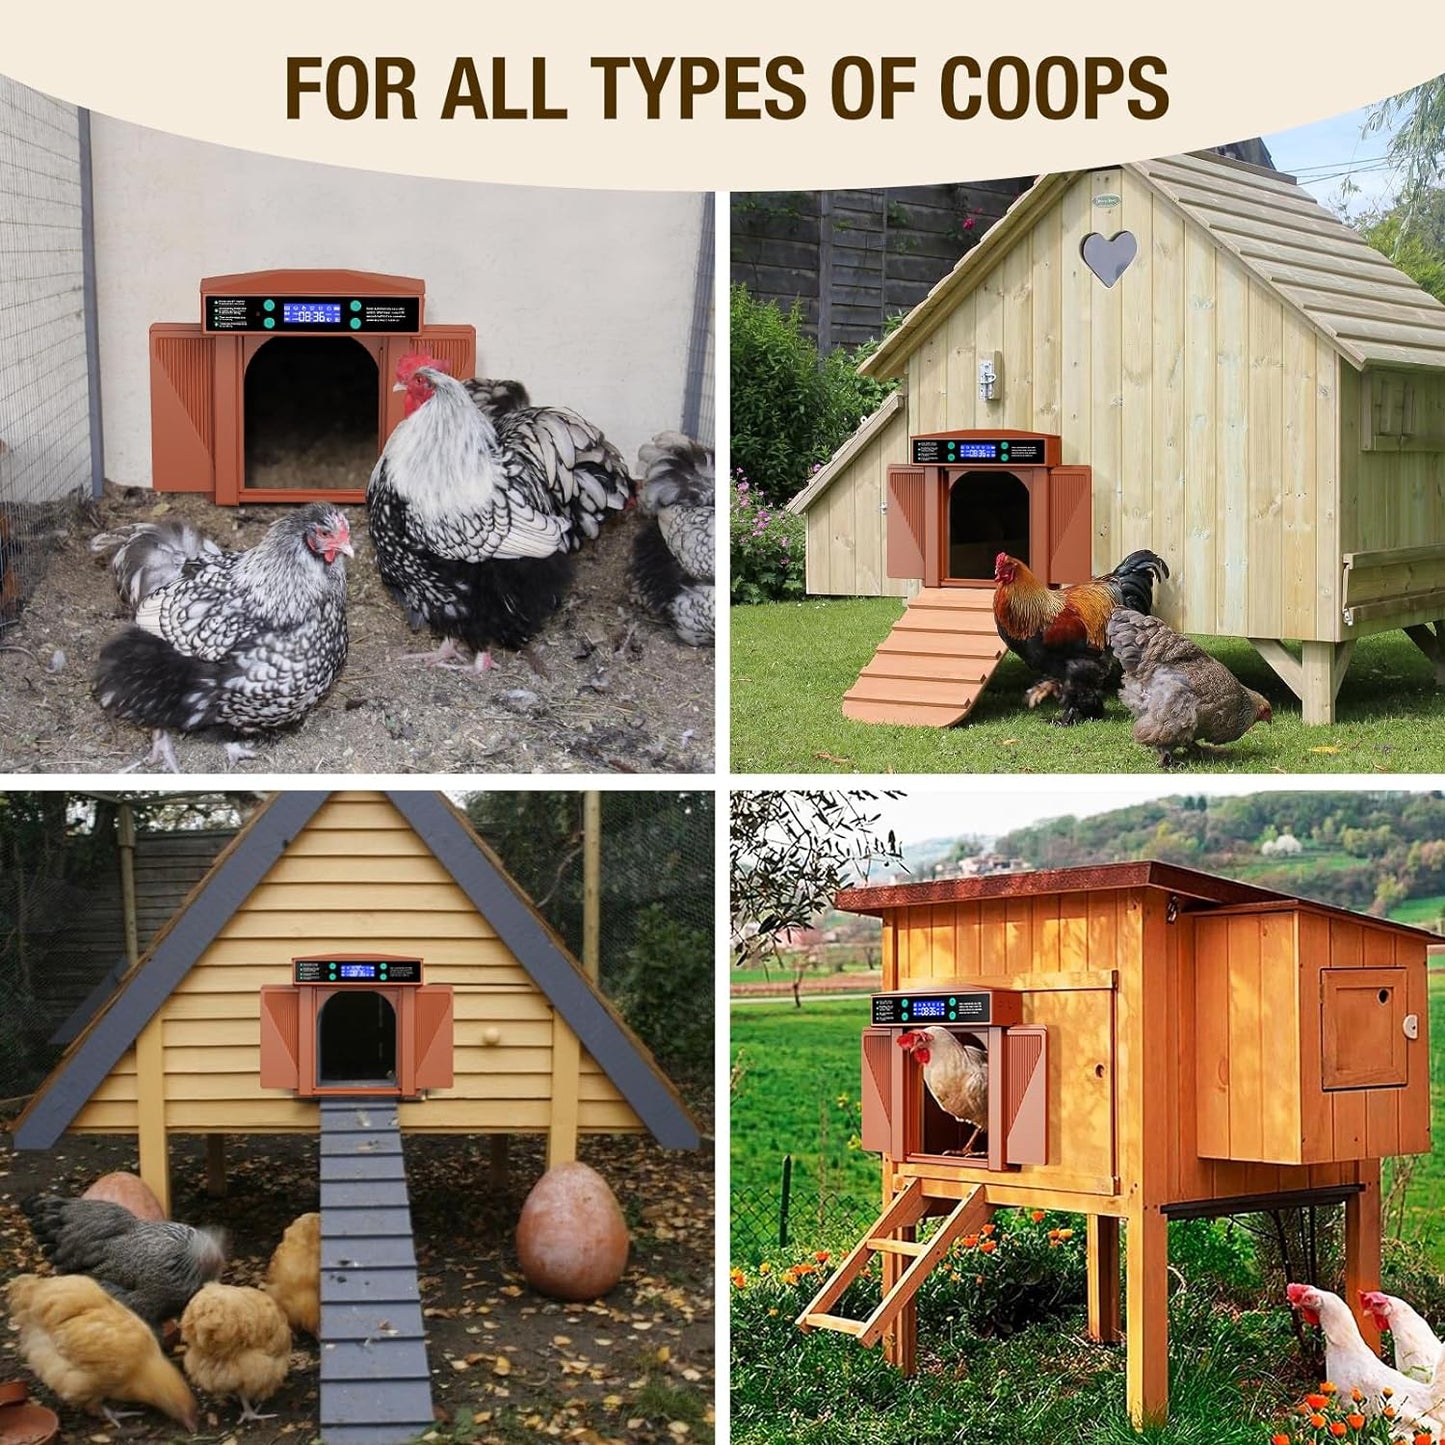 Automatic Chicken Coop Door 3 Modes for Opening and Closing - Manual,Timer and Light Sensor, Anti-Pinch Auto Chicken Door Powered by Battery/DC